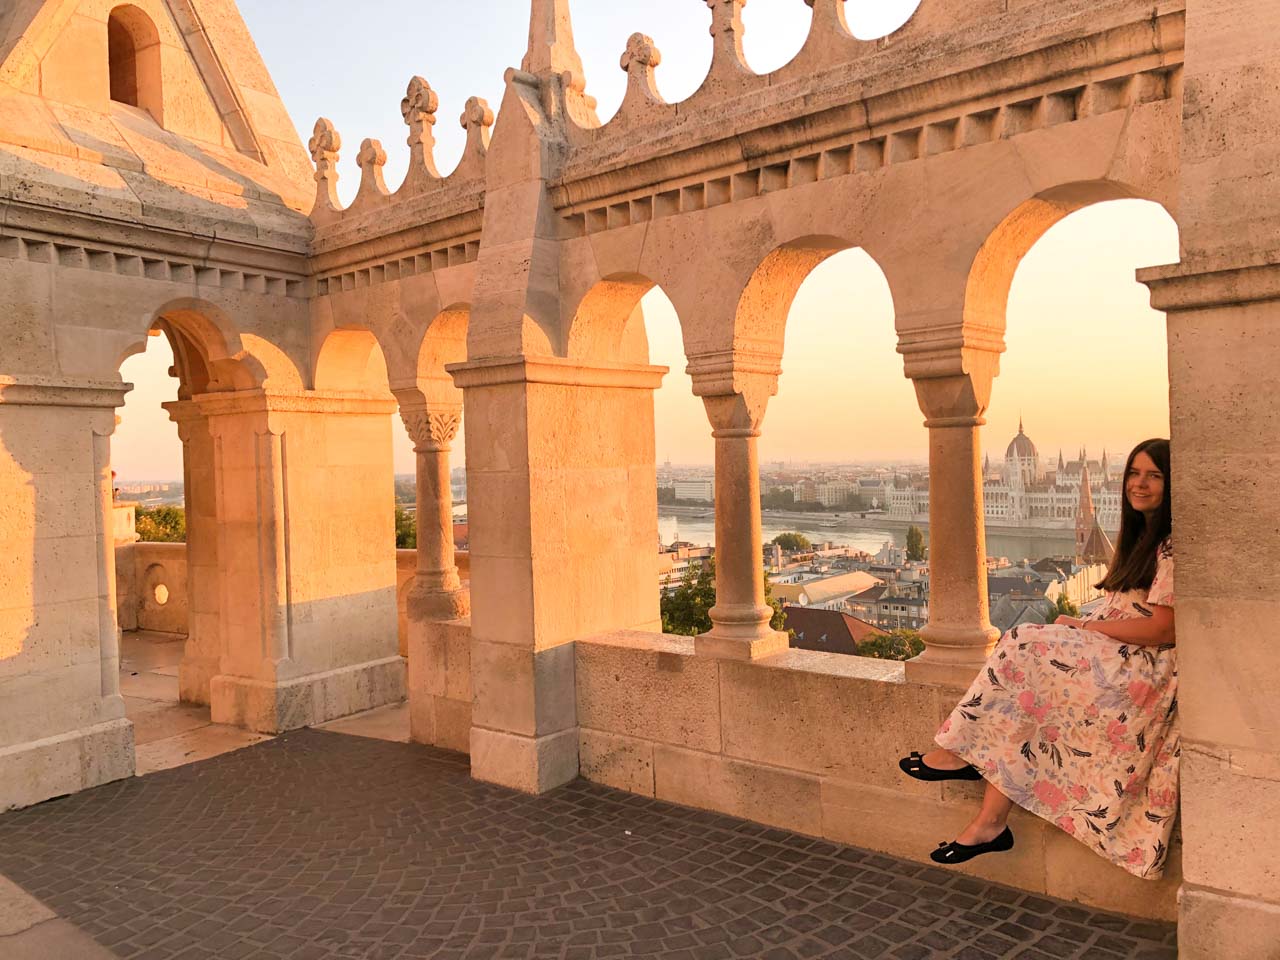 A girl in a maxi dress smiling at the camera as she is sitting on the ledge of the Fisherman's Bastion